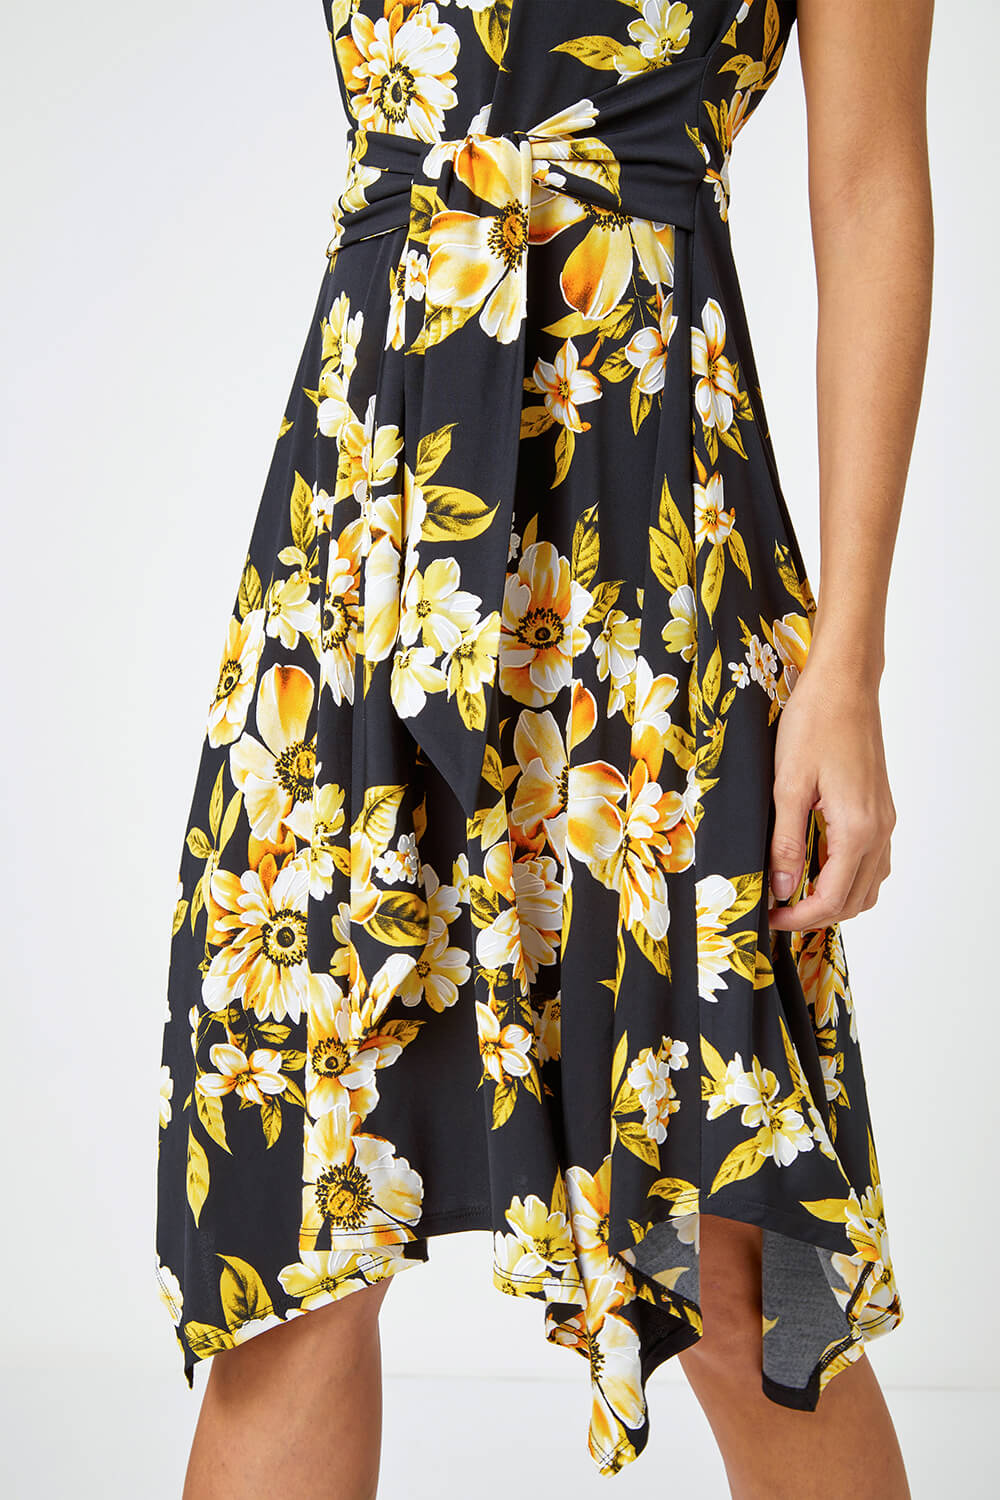 Yellow Textured Floral Print Tie Dress, Image 5 of 5